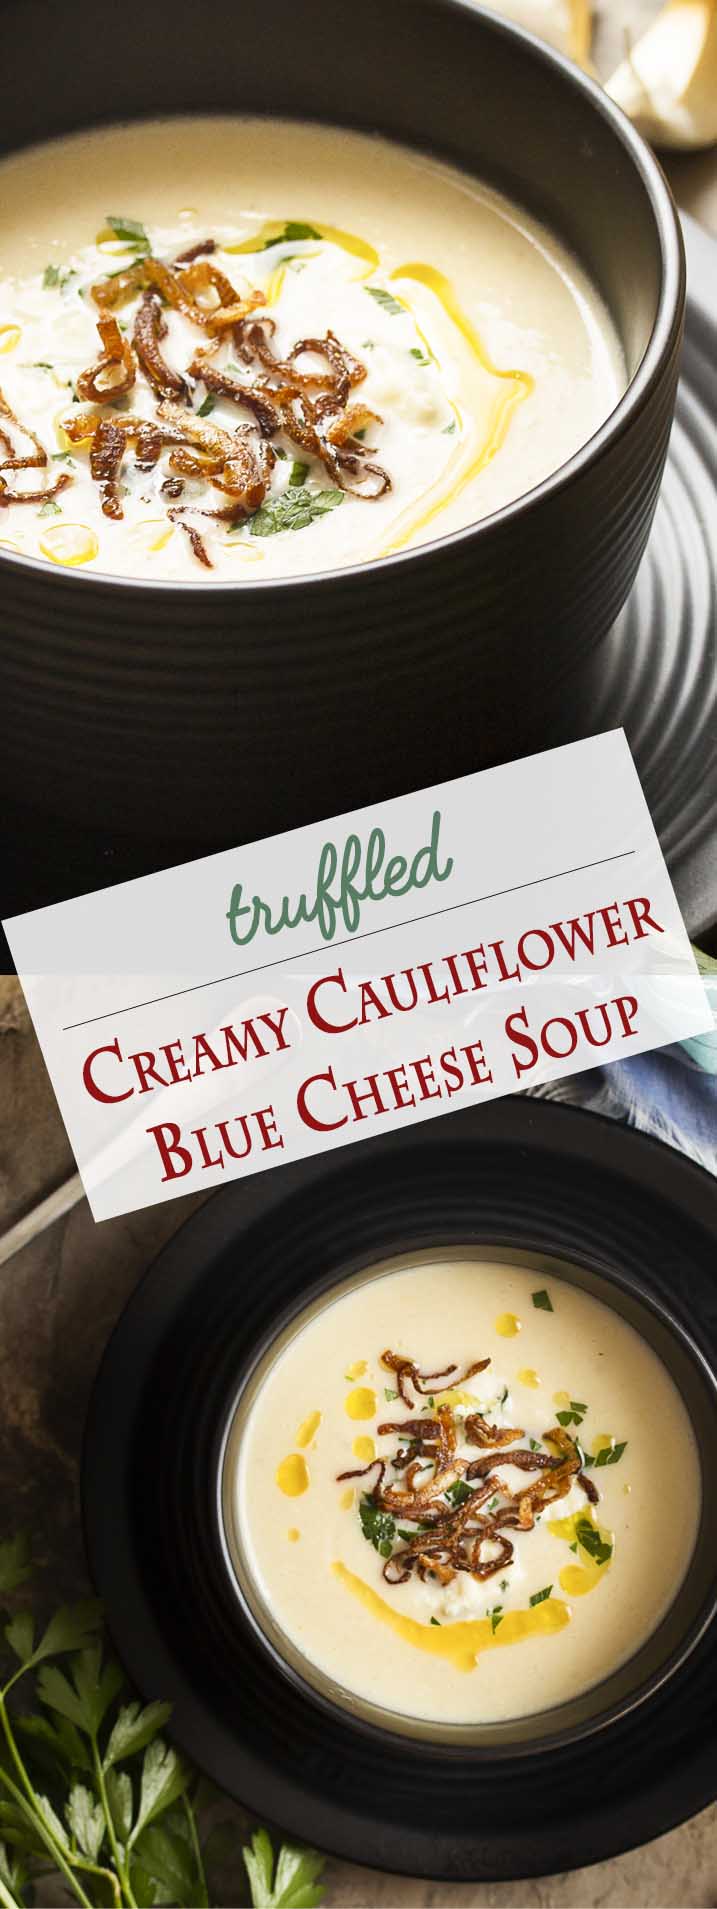 This smooth and creamy cauliflower soup is swirled with blue cheese and topped with truffle oil for great comfort food on a chilly day! | justalittlebitofbacon.com